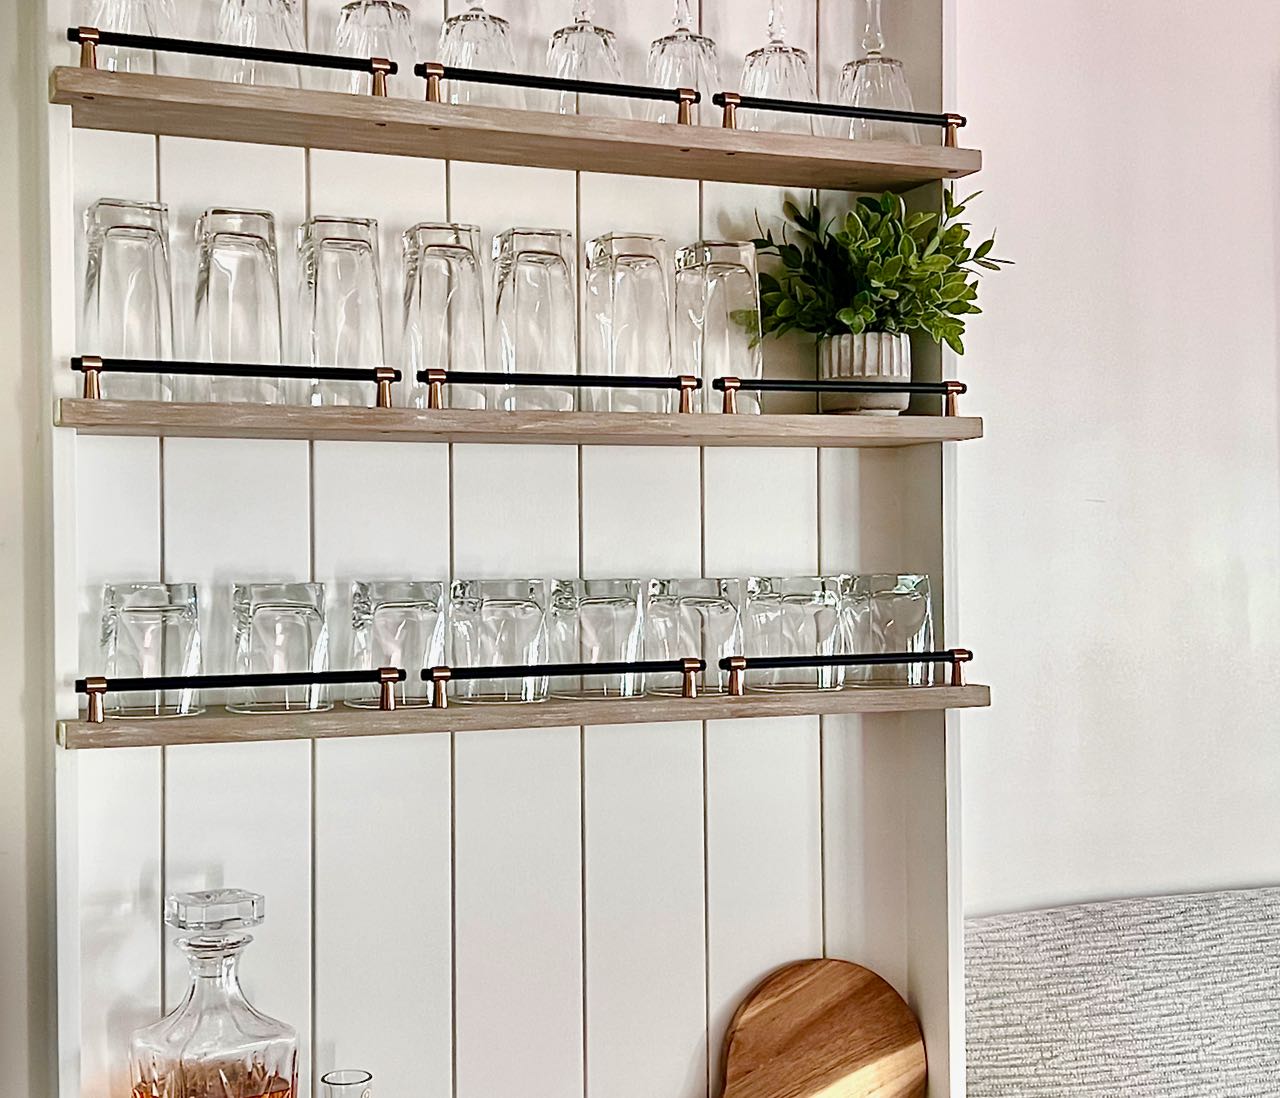 You Don't Need to Spend a Fortune to Stock Your Home Bar